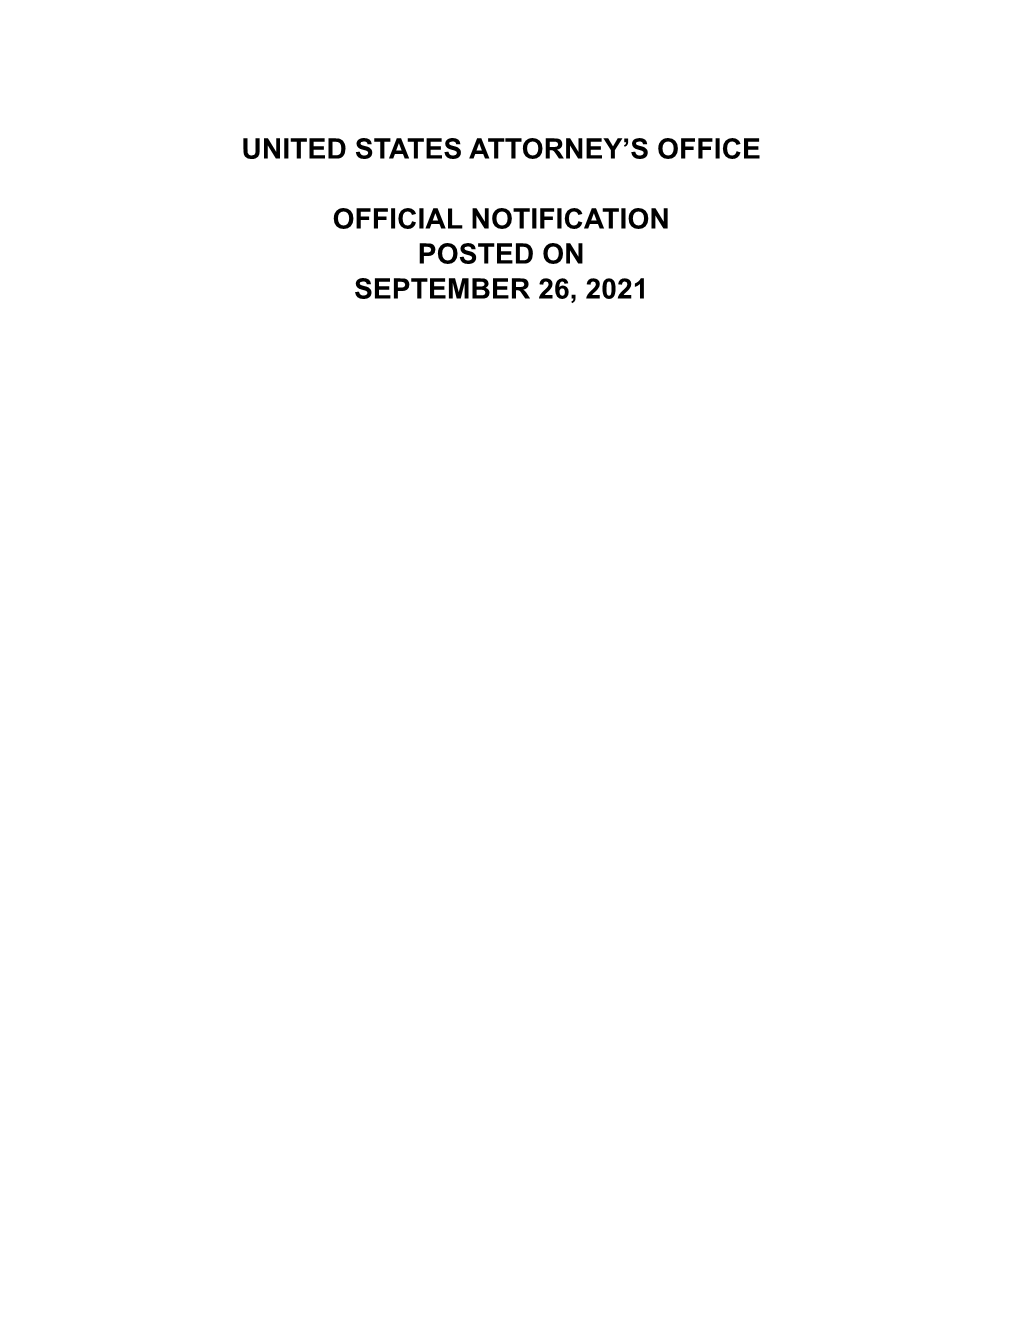 United States Attorney's Office Official Notification Posted on September 07